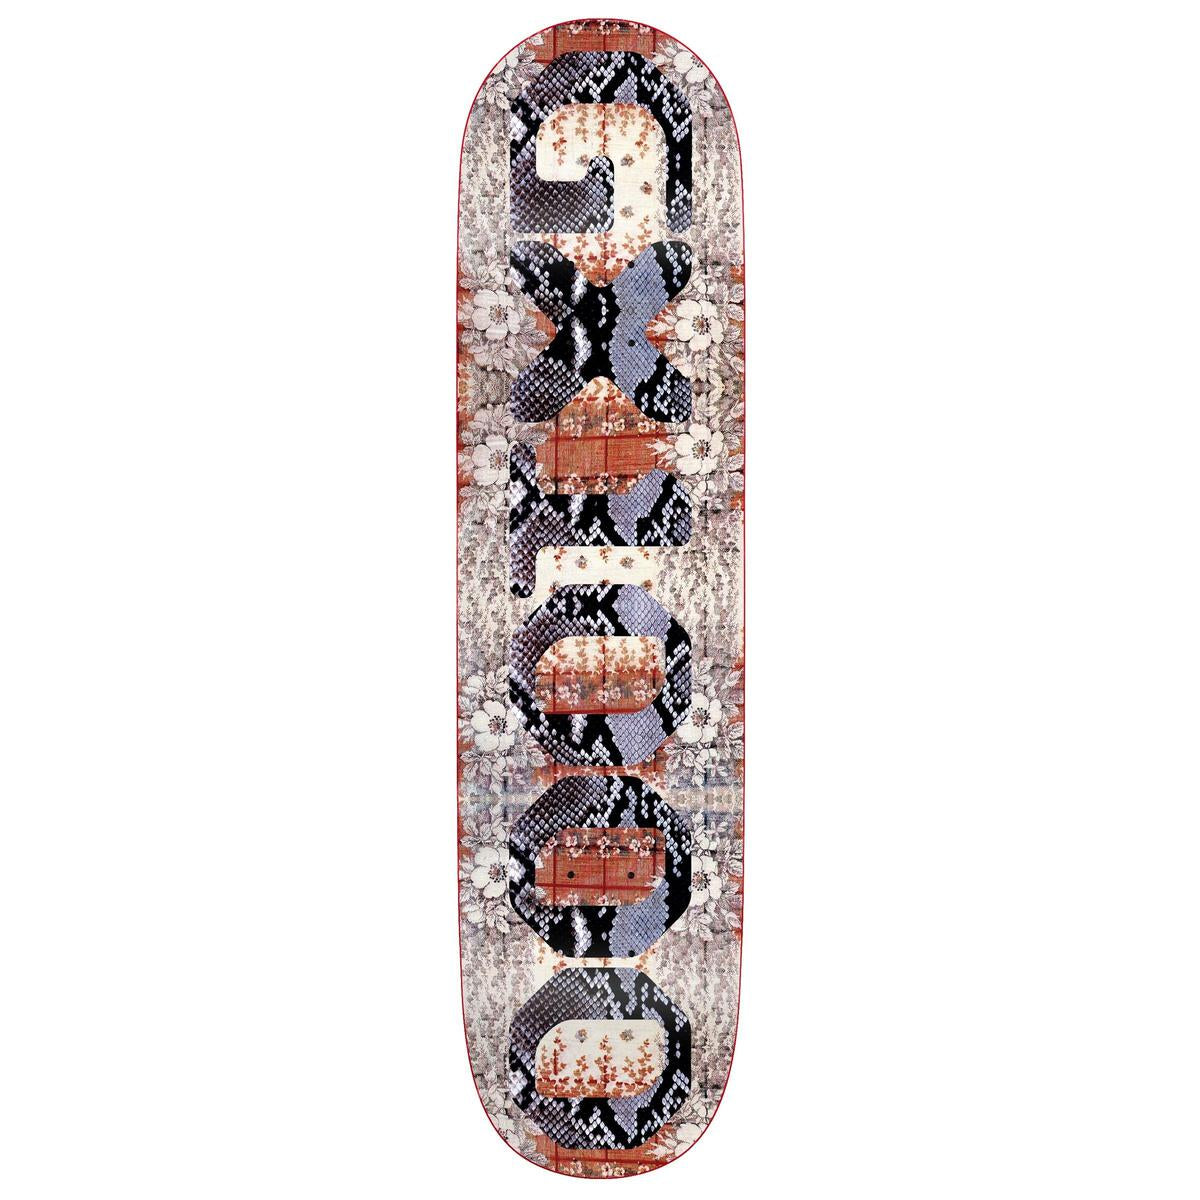 GX 1000 "OG Black and White Scales" 8.125" Deck